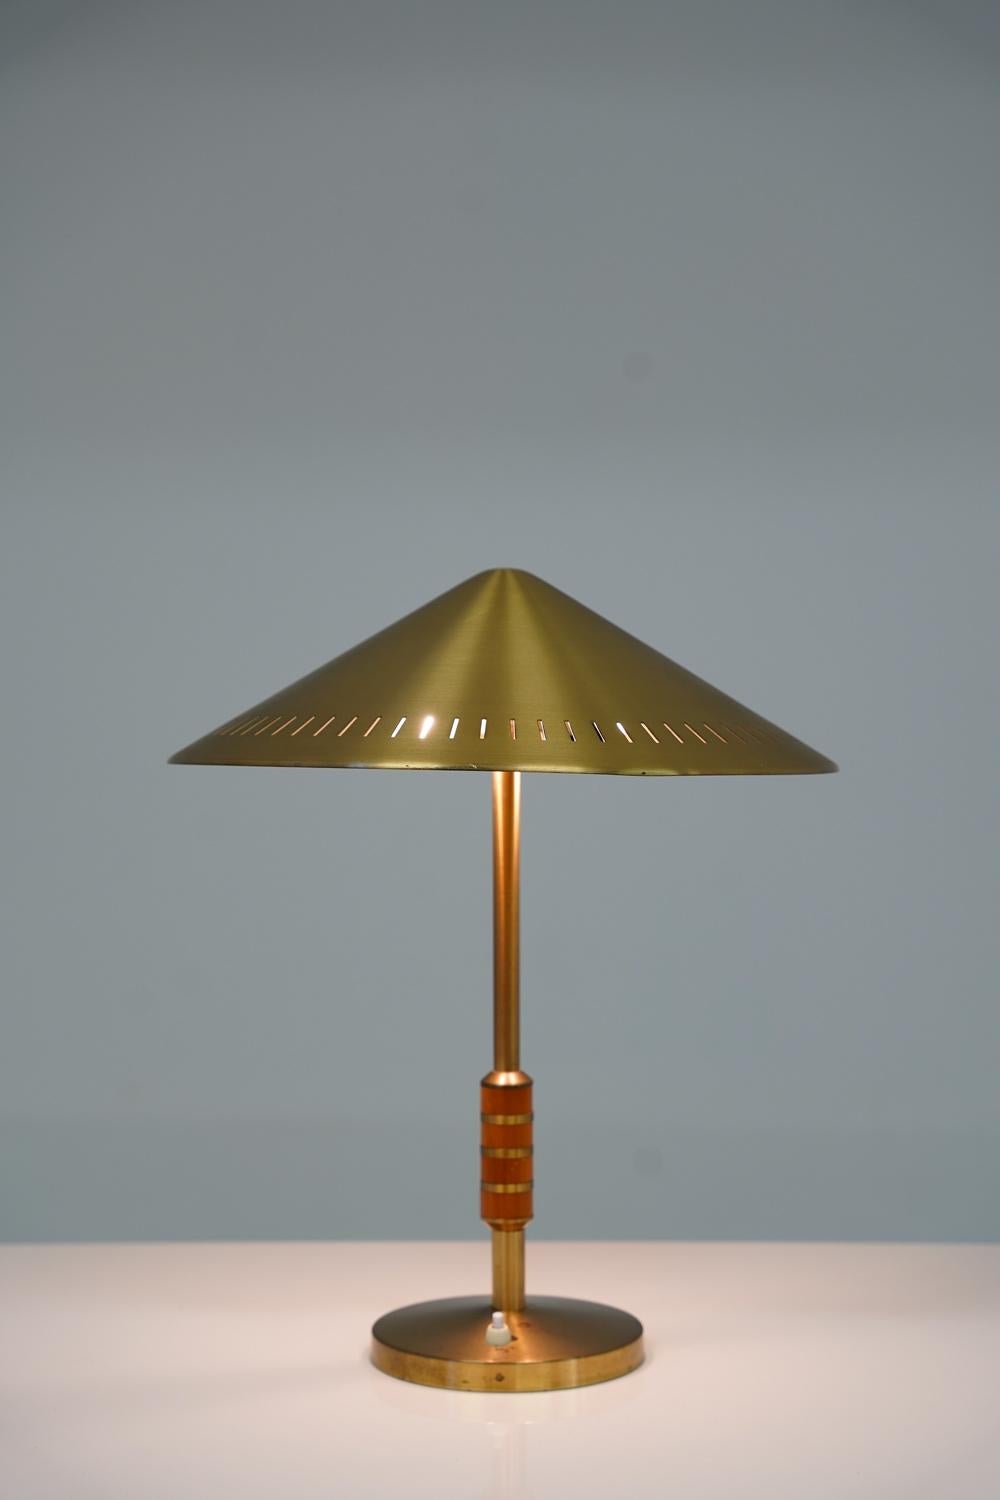 Rare table lamp model 8403 by Boréns, Sweden. 
This lamp is made of solid brass with details in teak and features a beautiful perforated shade. 

Condition: Very good original condition with a few spots on the base.